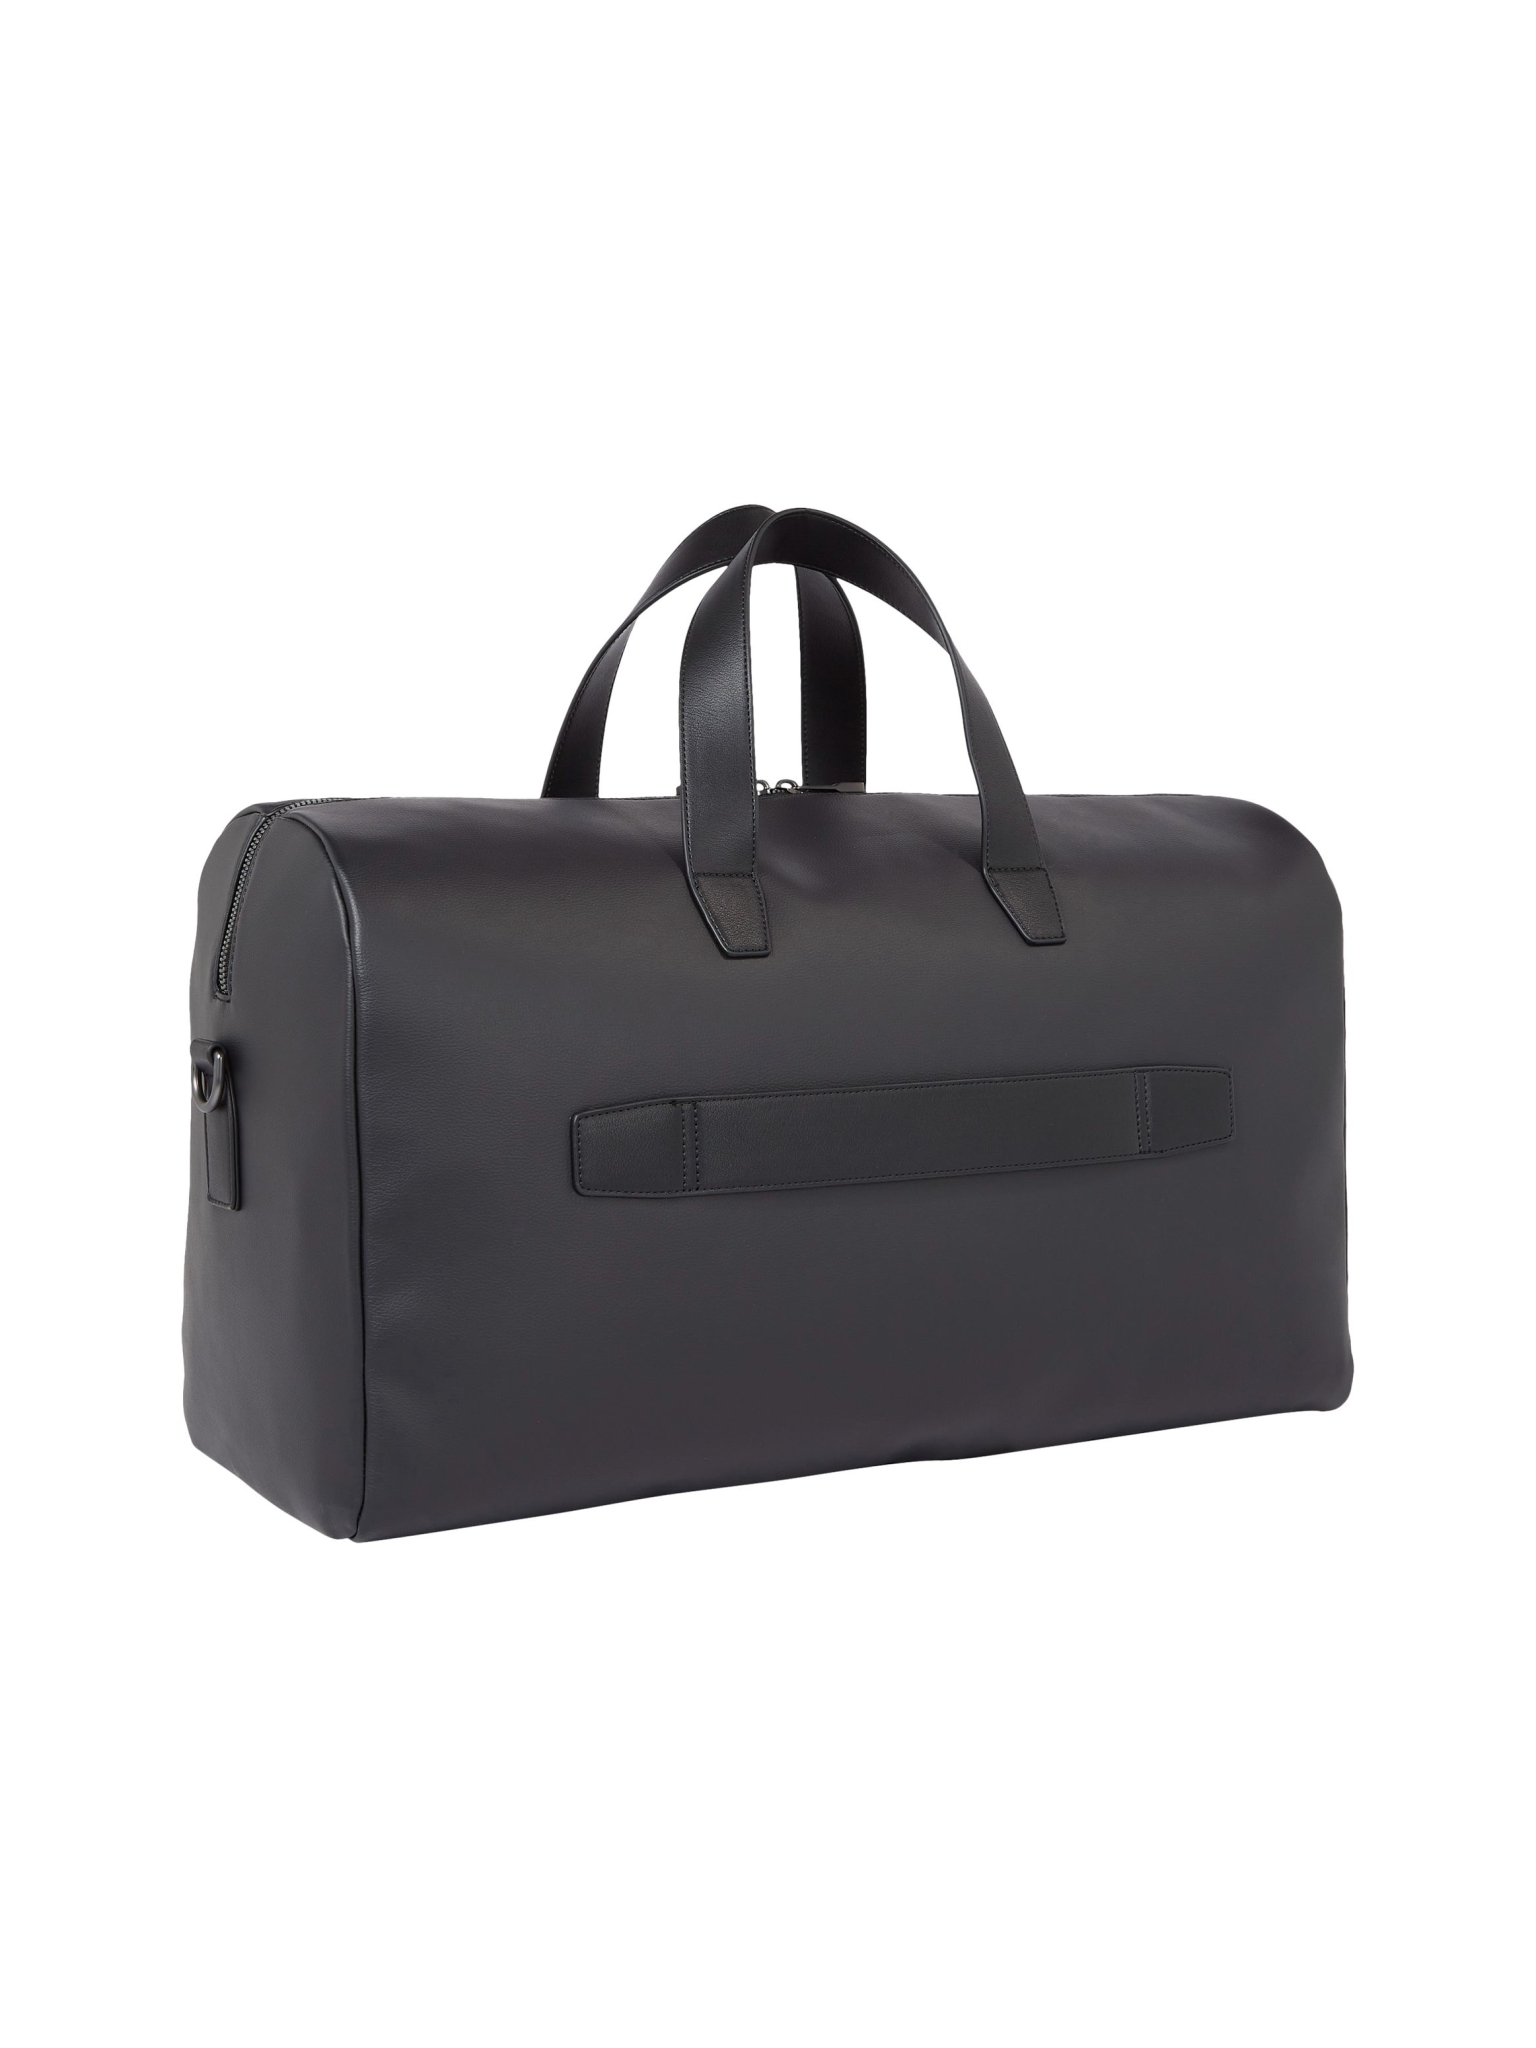 TOMMY HILFIGER TH Corporate Duffle Bag 10684233